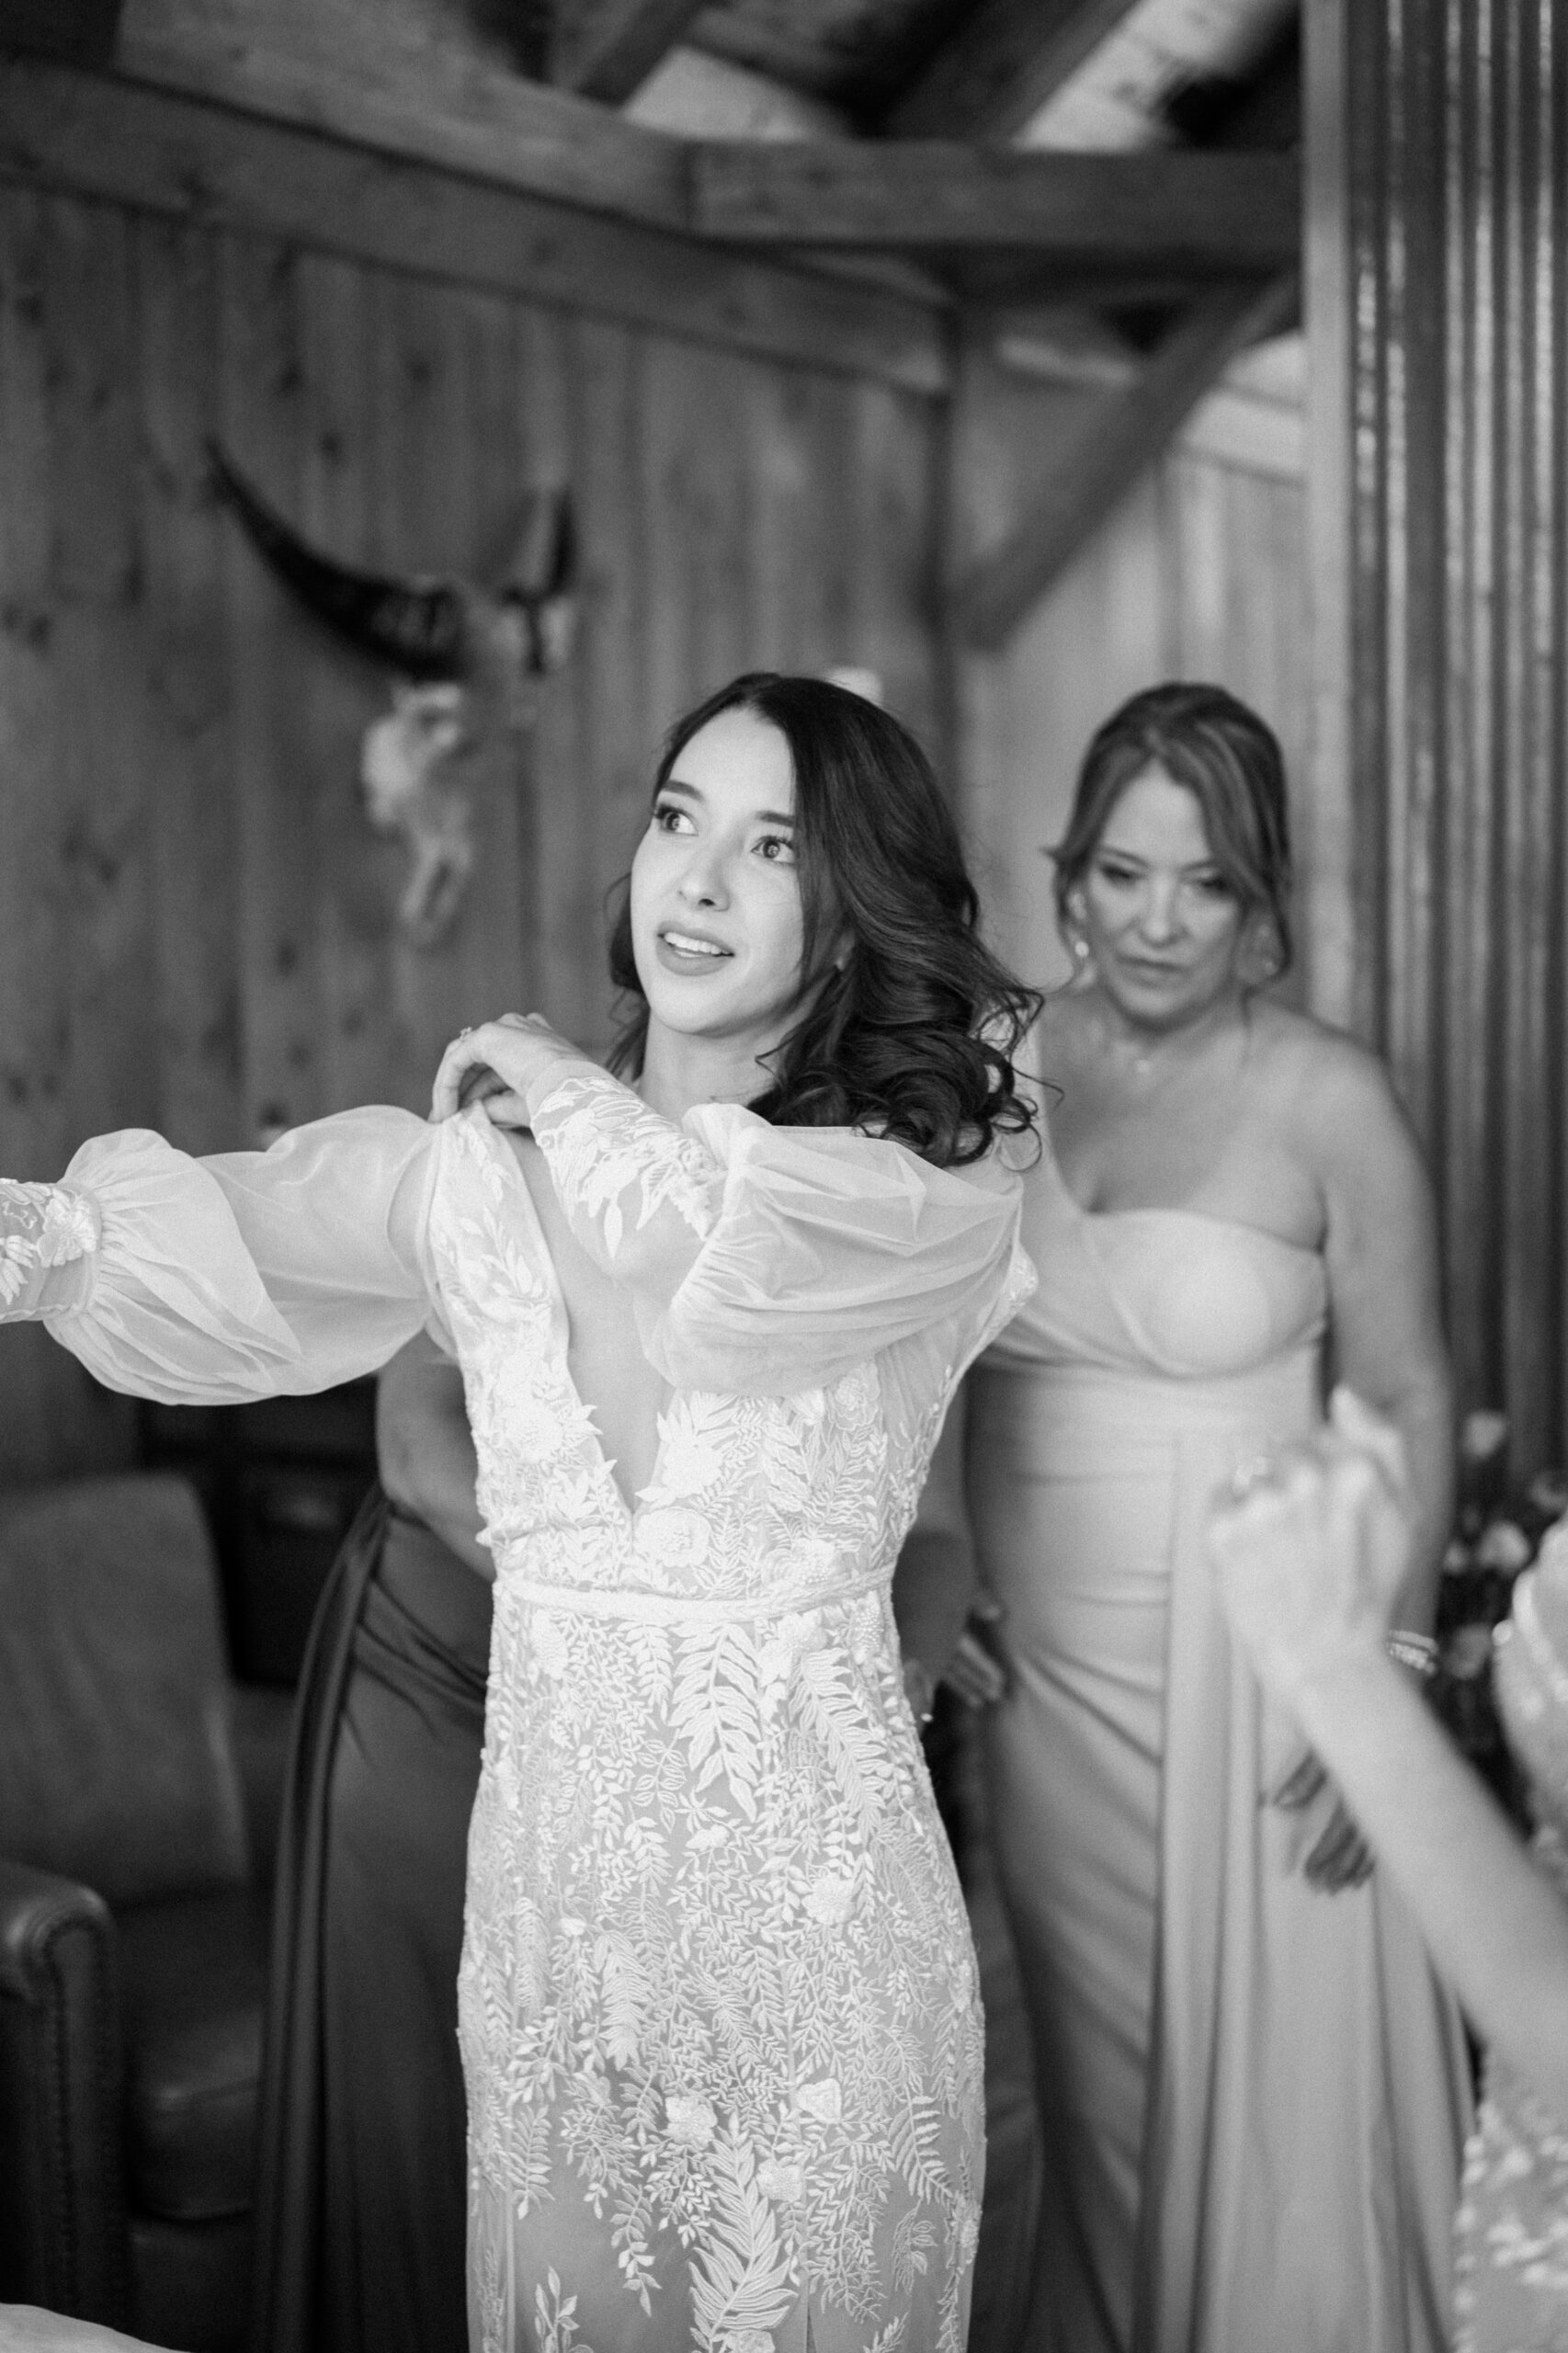 A black and white photo of a bride getting in her wedding dress. Photo by Ashley Joyce.